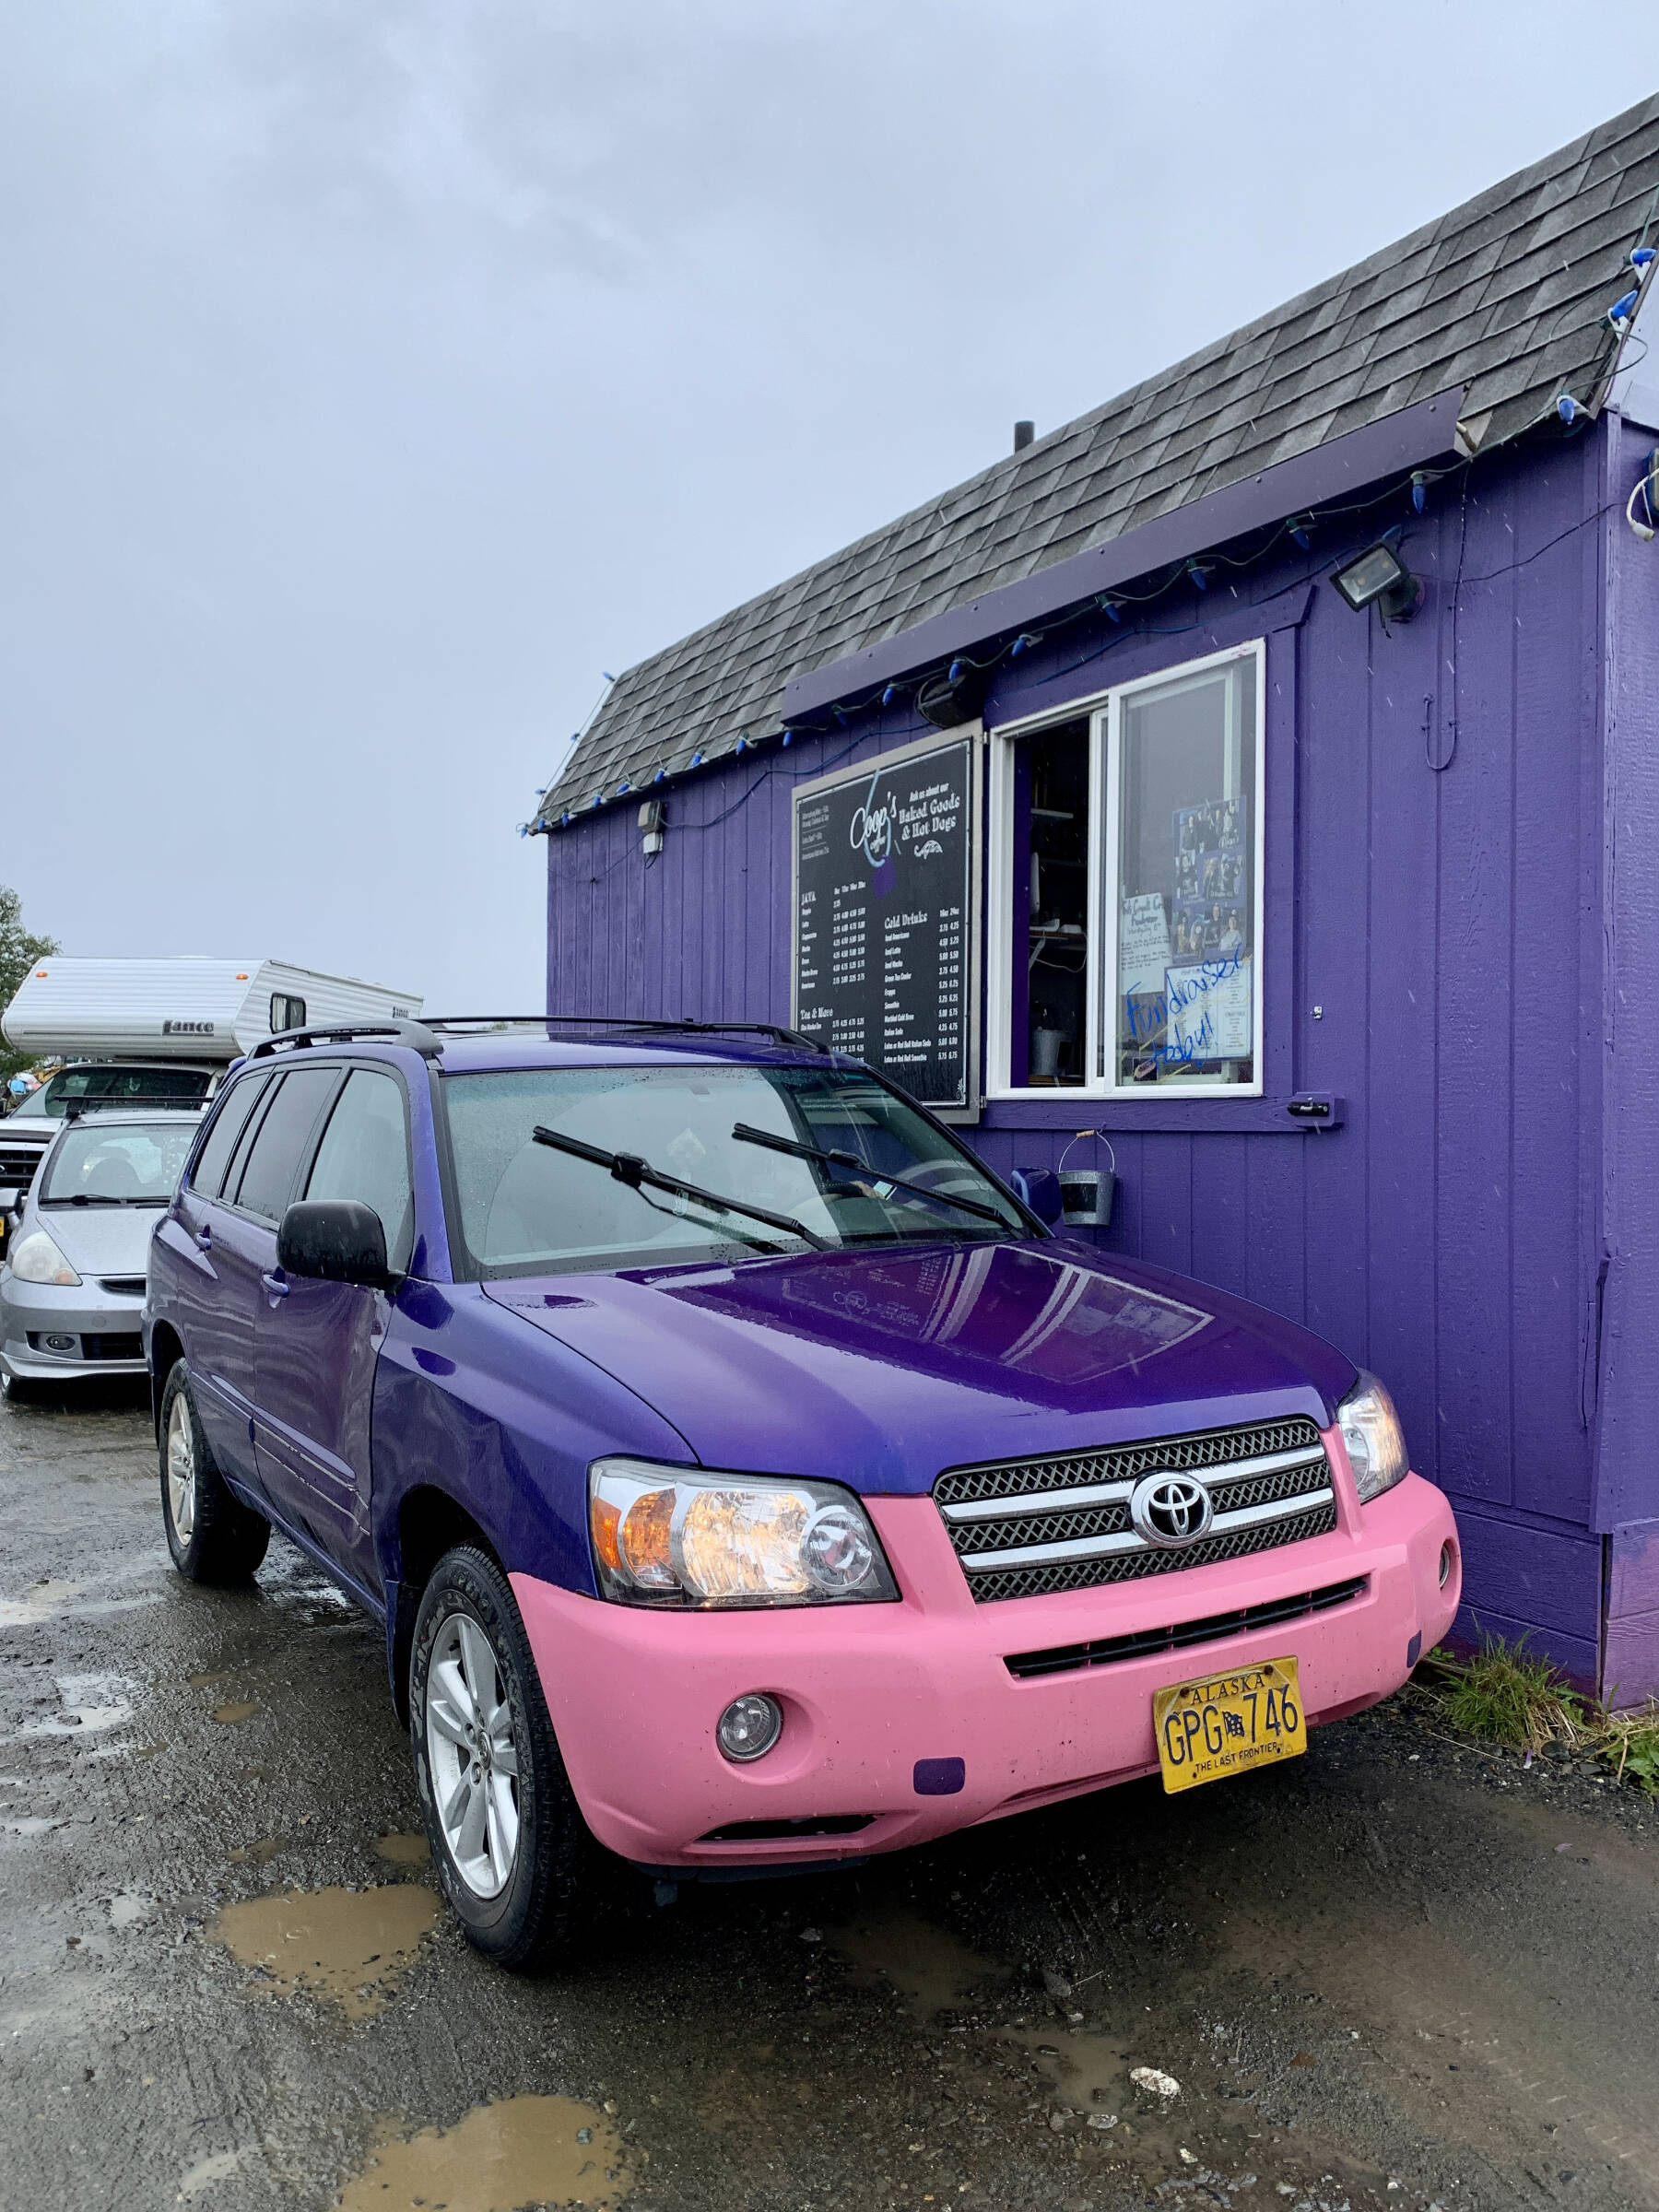 Customers drive through Coops Coffee on Saturday July, 15, 2023 in Homer, Alaska. $6,464 was raised by owner Kelly Cooper, who donated all proceeds from Saturday’s sales to the Fritz Creek General Store employees who lost their job due to the recent fire. Photo by Christina Whiting